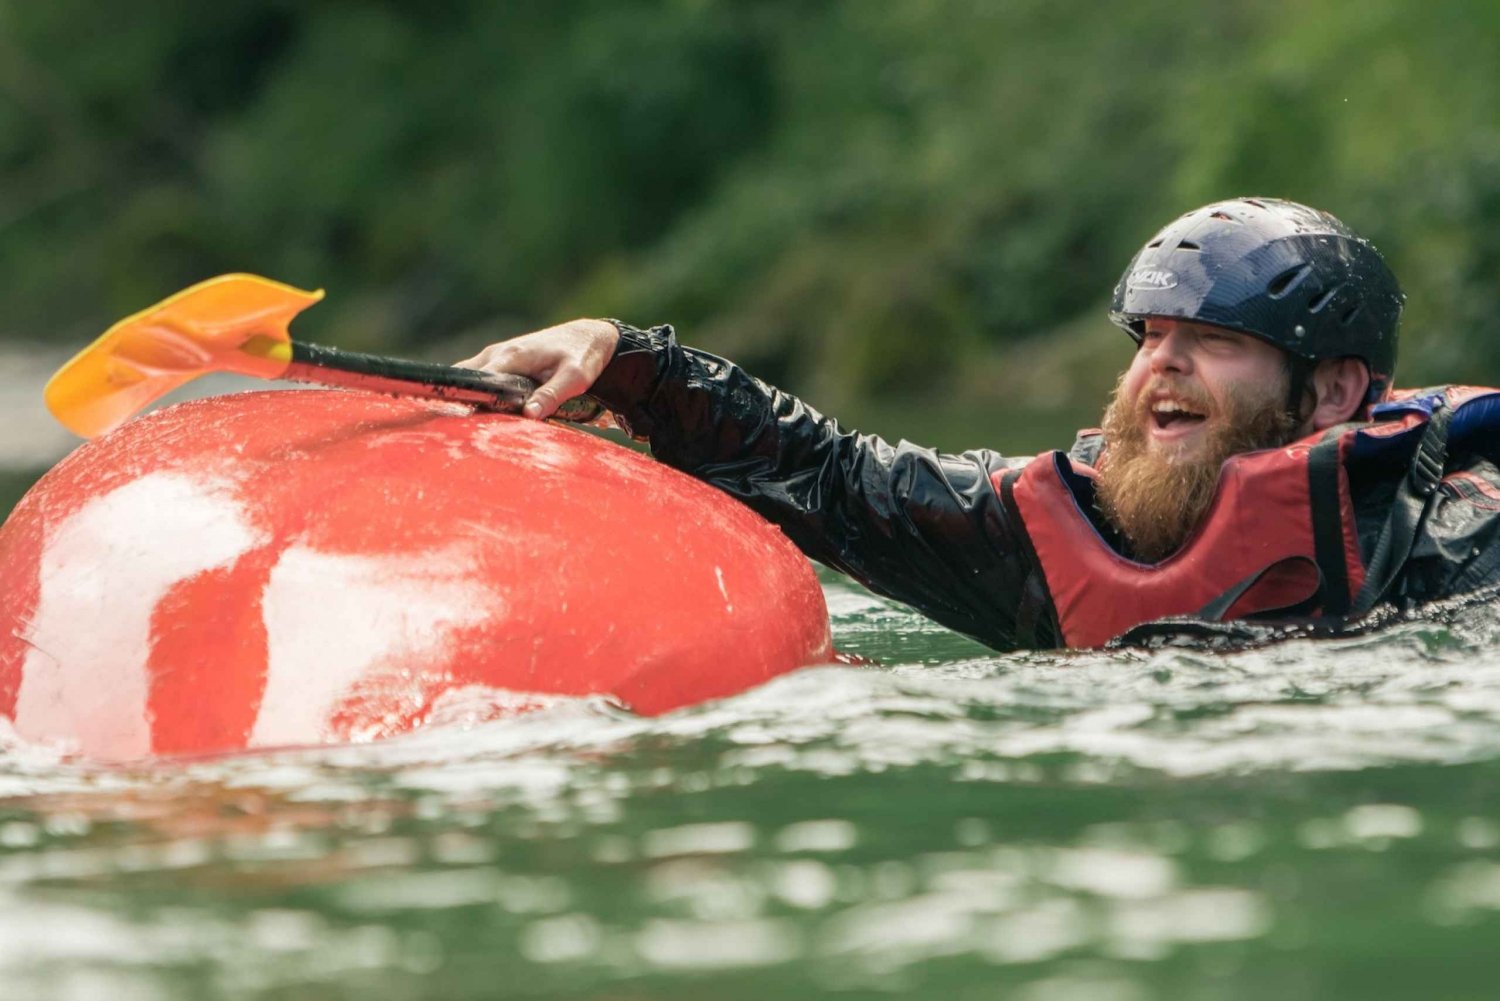 From Bled: Sava River Kayaking Adventure